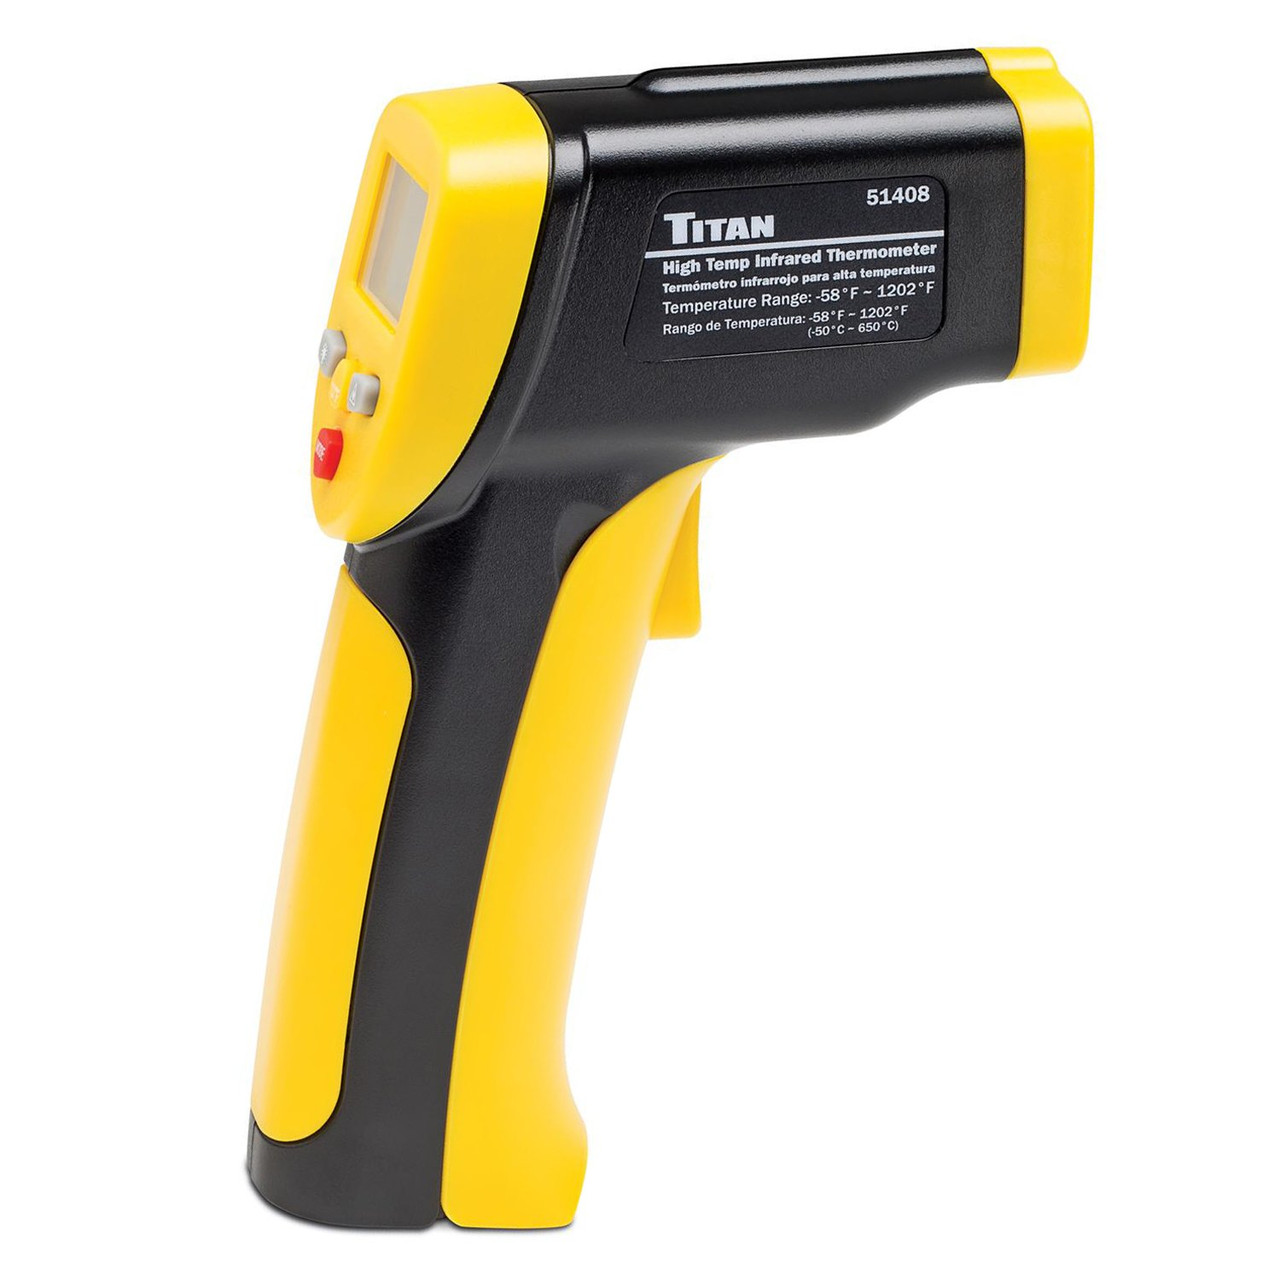 Titan Tools High Temp Infrared Thermometer (51408)